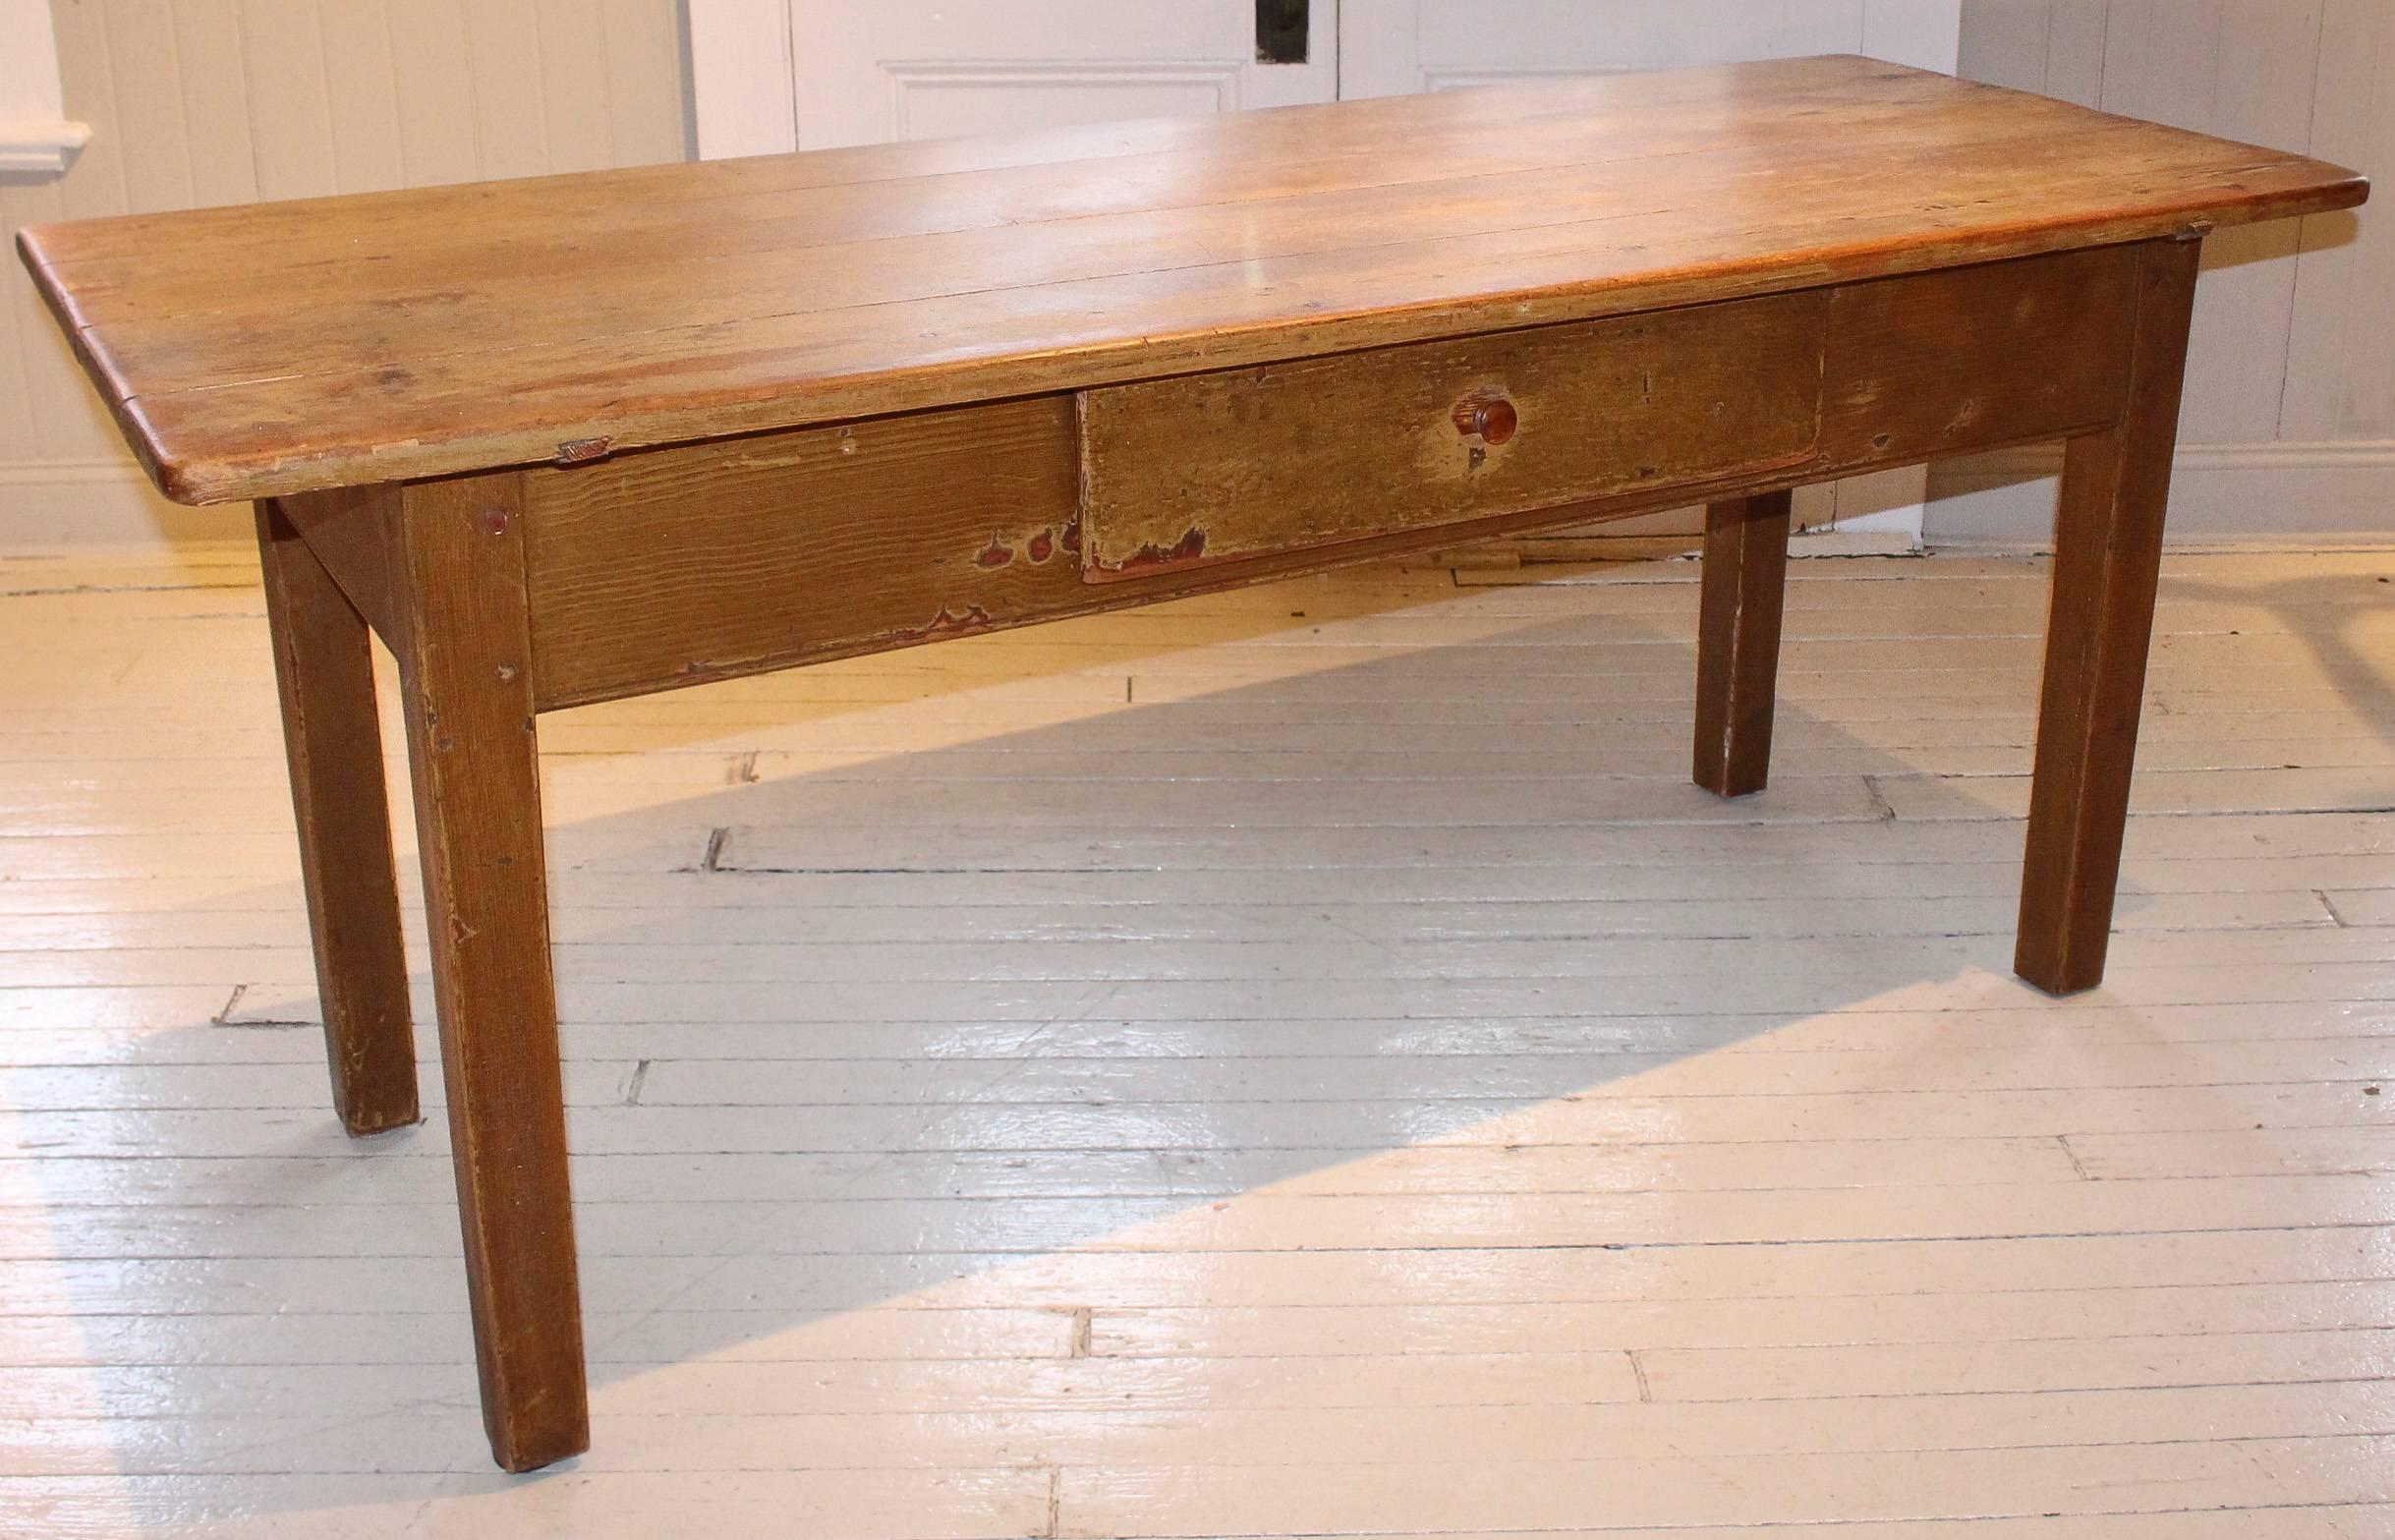 Antique long table, 19th century French with four-plank top. Table has two drawers, one in front and the other on the side.